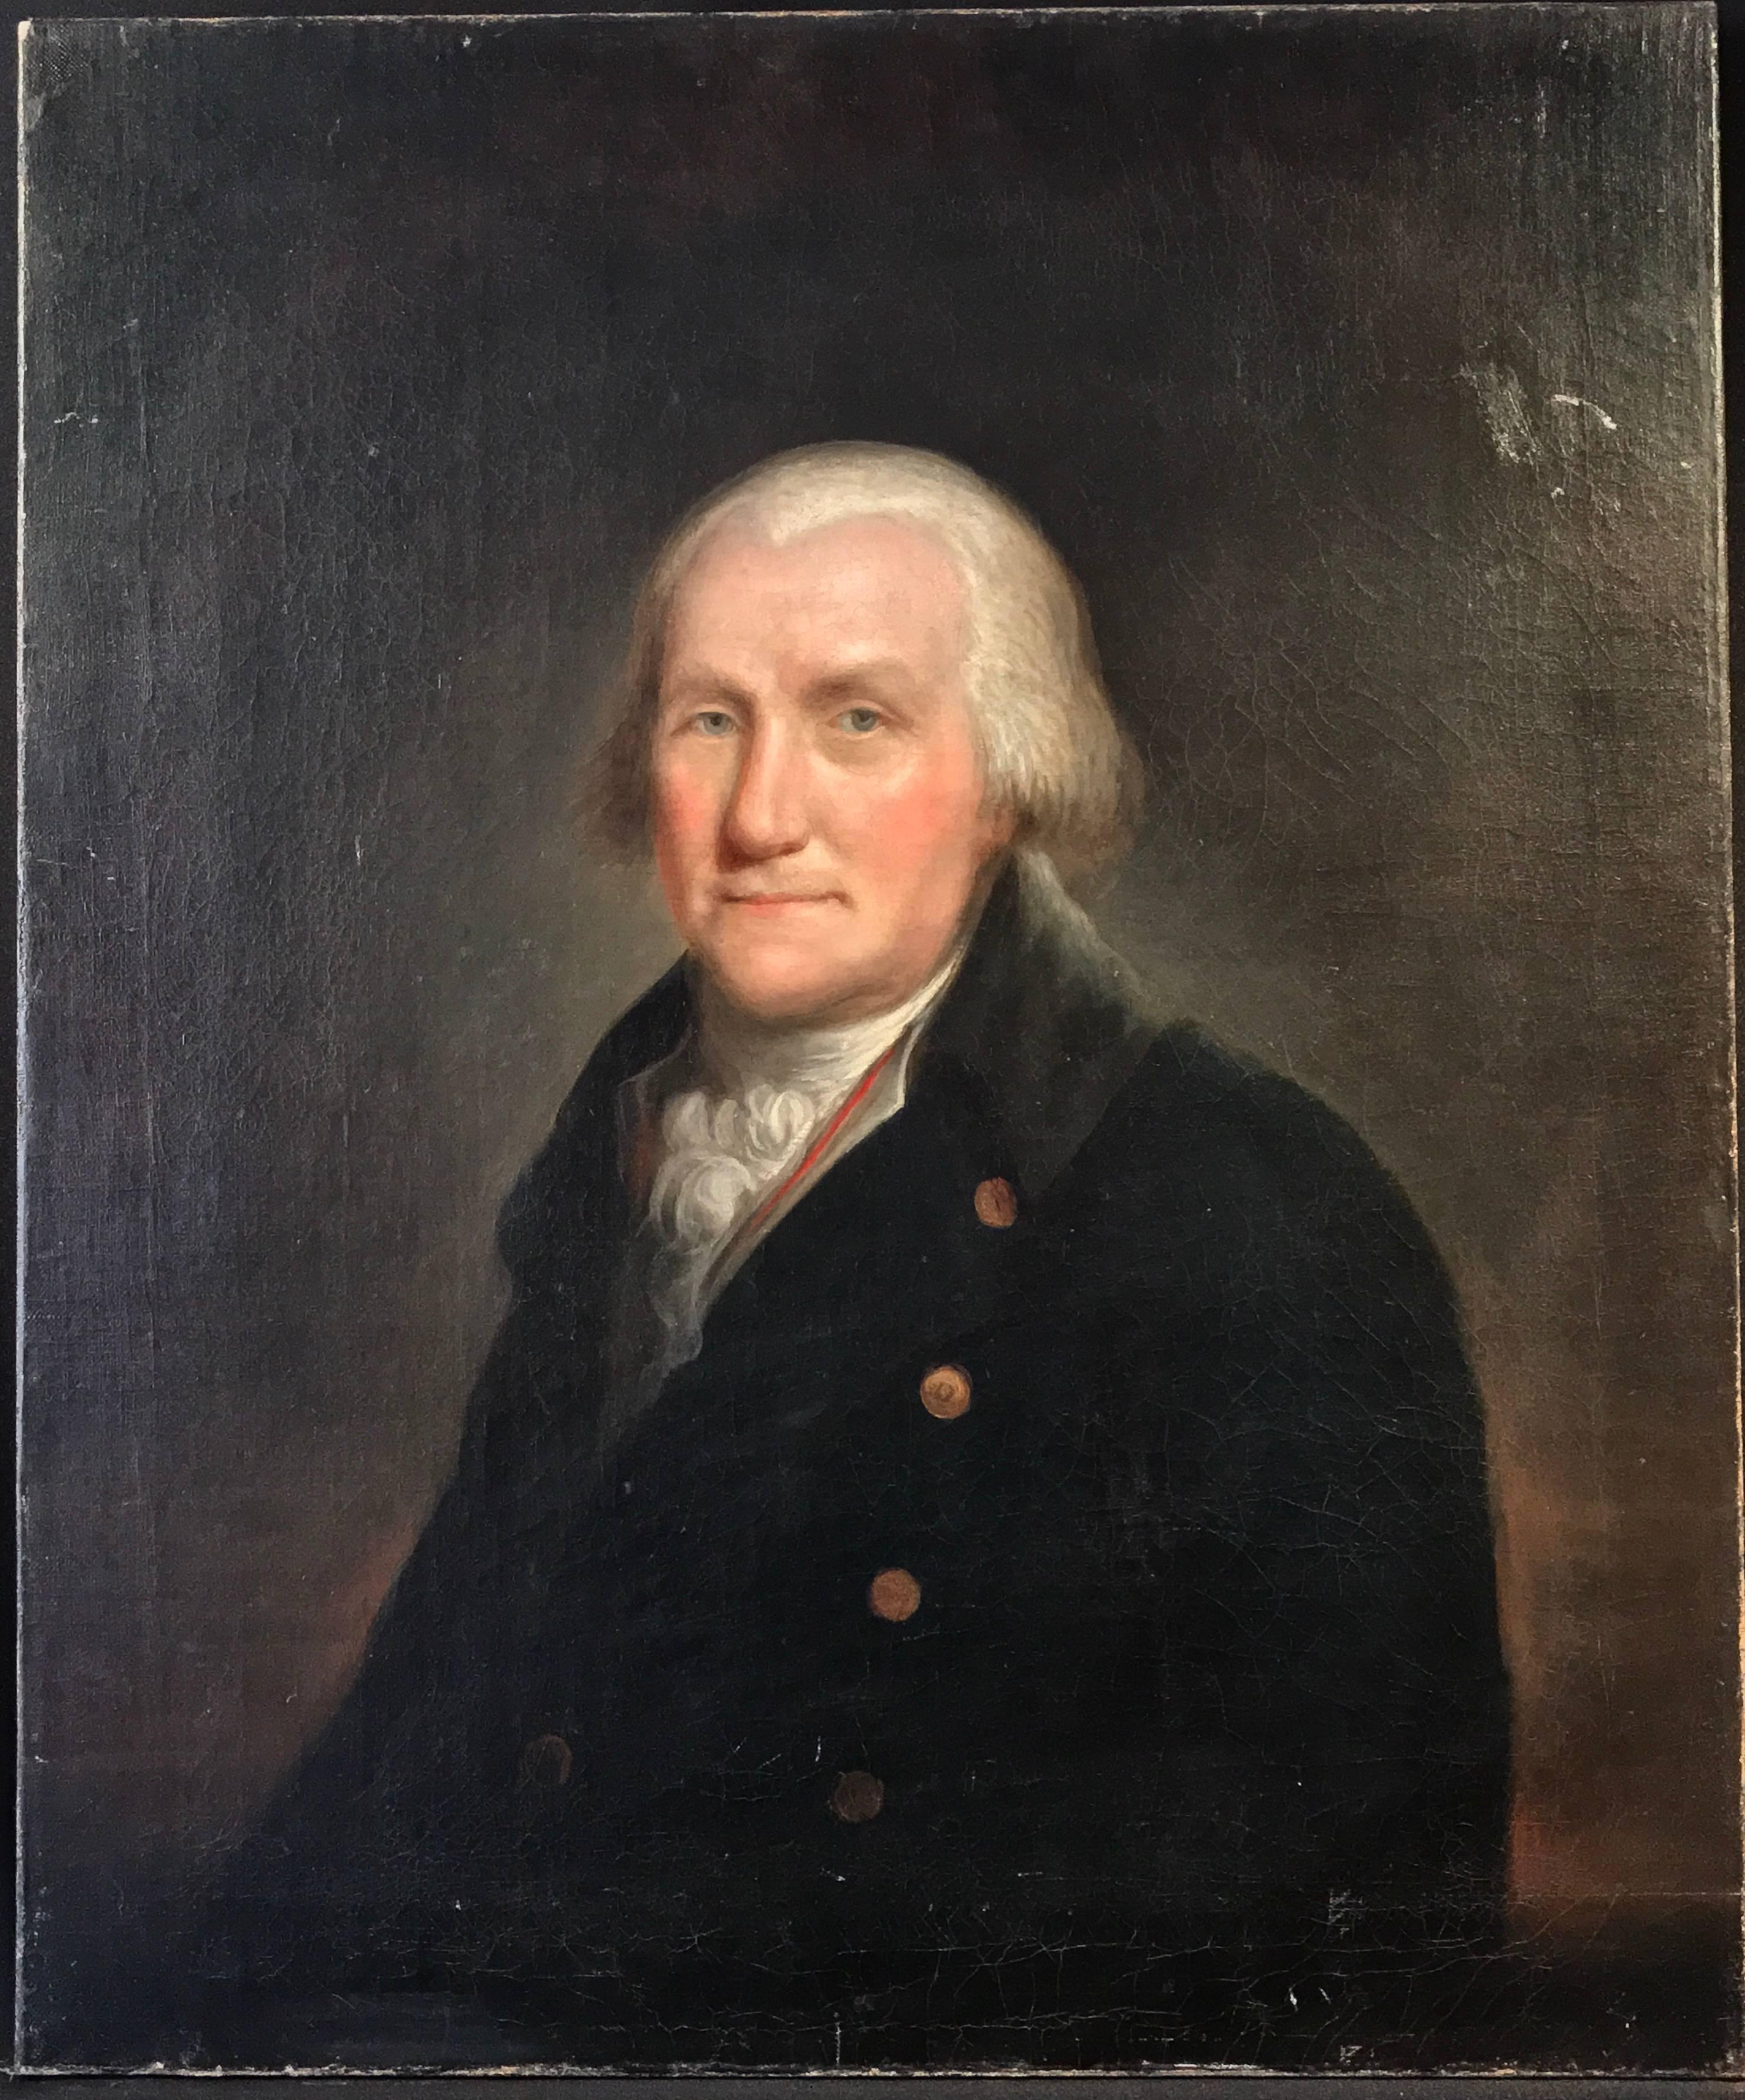 18th Century Portrait believed to be George Washington - Painting by (After) Charles Willson Peale